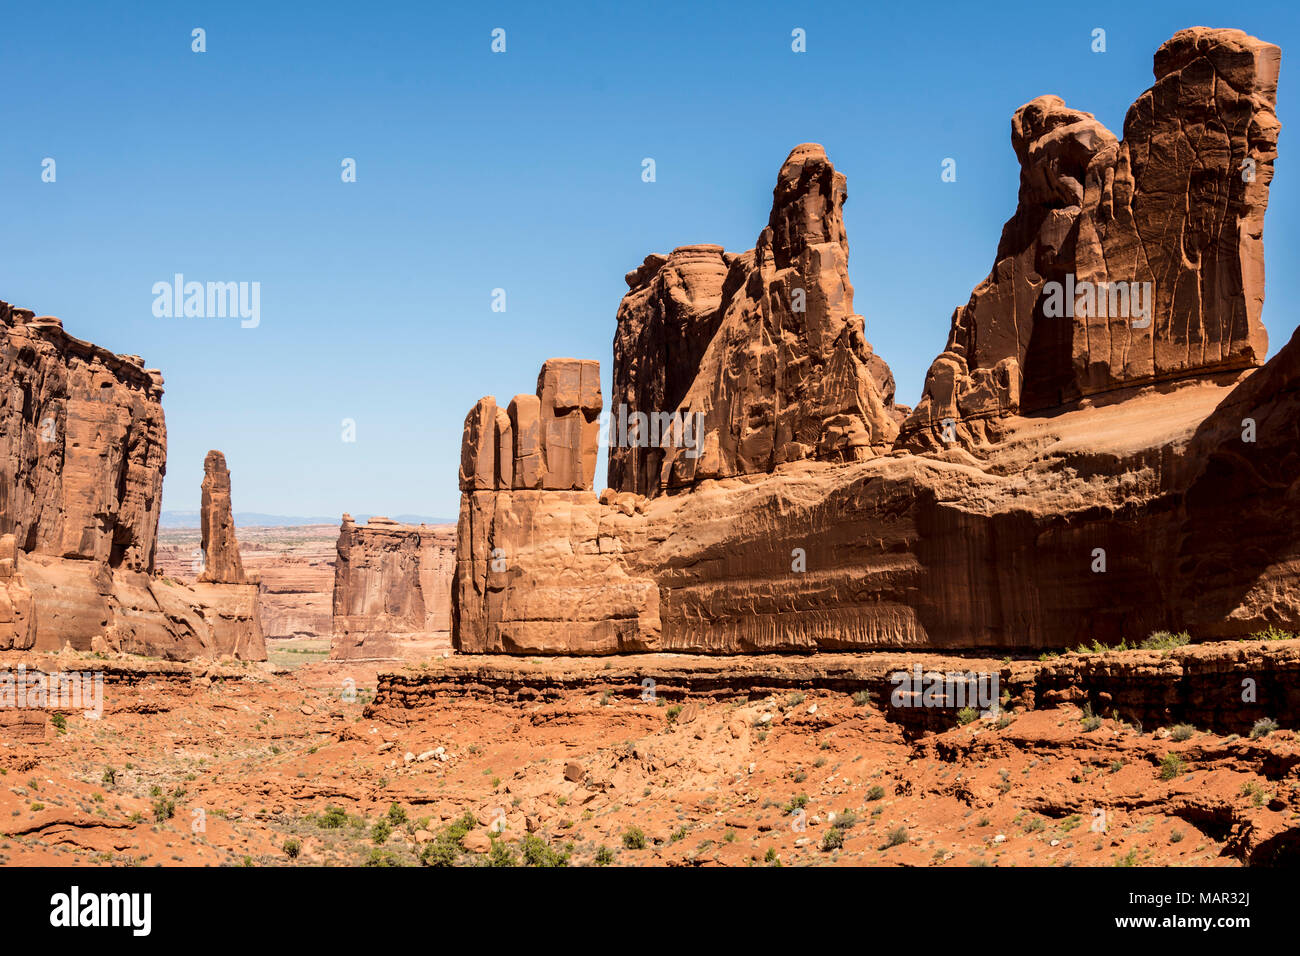 Sandstone towers along Park Avenue canyon, Arches National Park, Moab, Utah, United States of America, North America Stock Photo